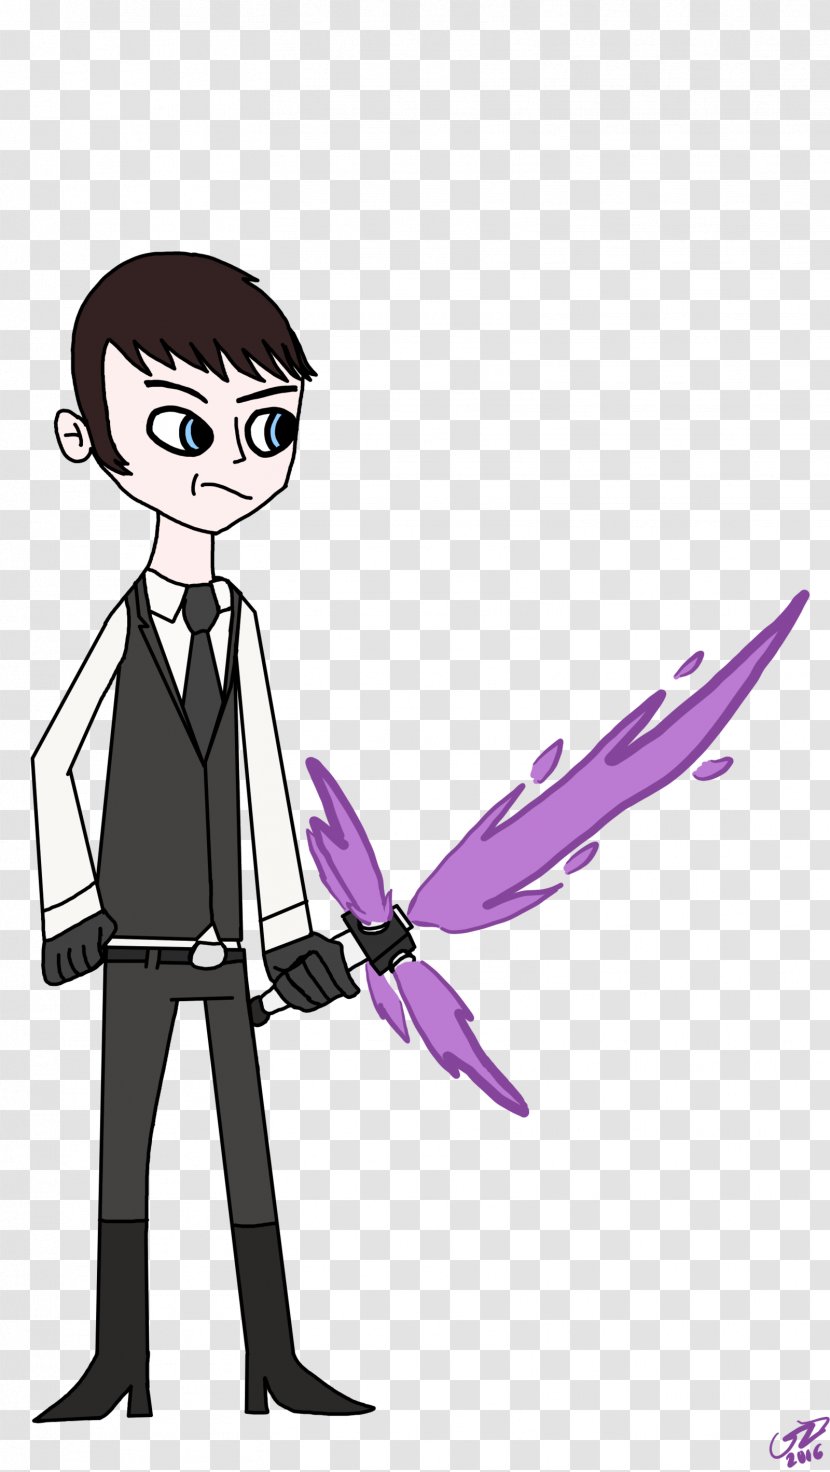 No More Heroes 2: Desperate Struggle Wii Killer Is Dead Travis Touchdown - Cartoon Transparent PNG